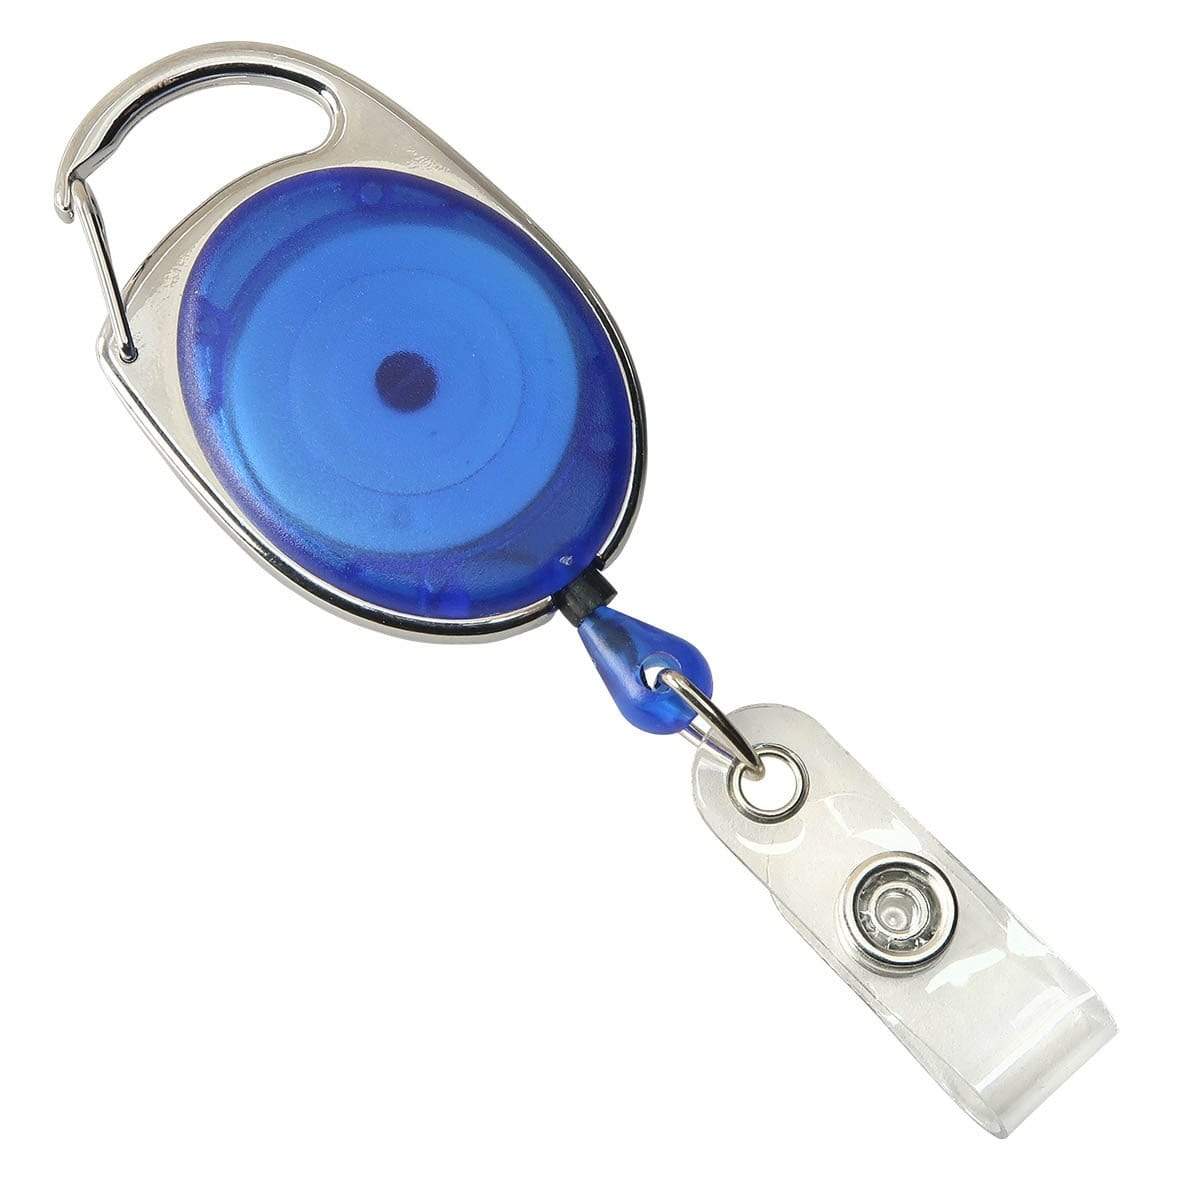 Promotional 30 Cord Round Jumbo Imprint Retractable Badge Reel with Metal Slip Clip Backing and Badge Holder - 4 Colors